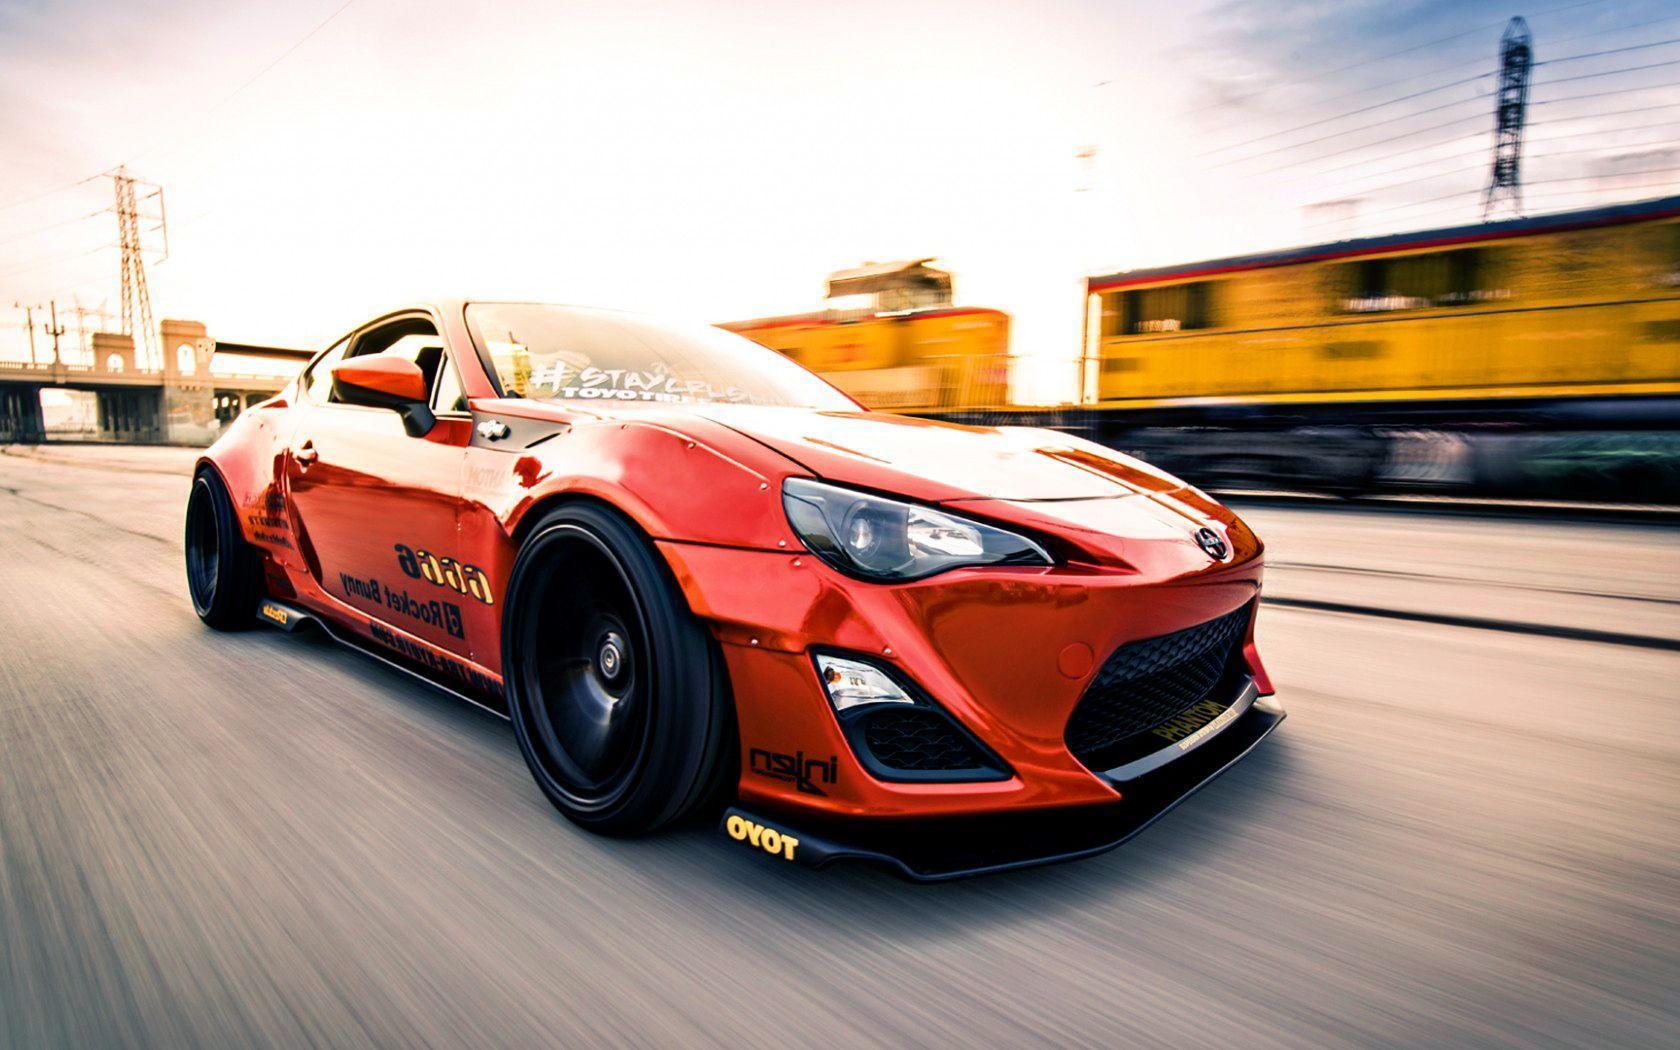 Toyota 86 Wallpaper, High Quality Toyota 86 Background